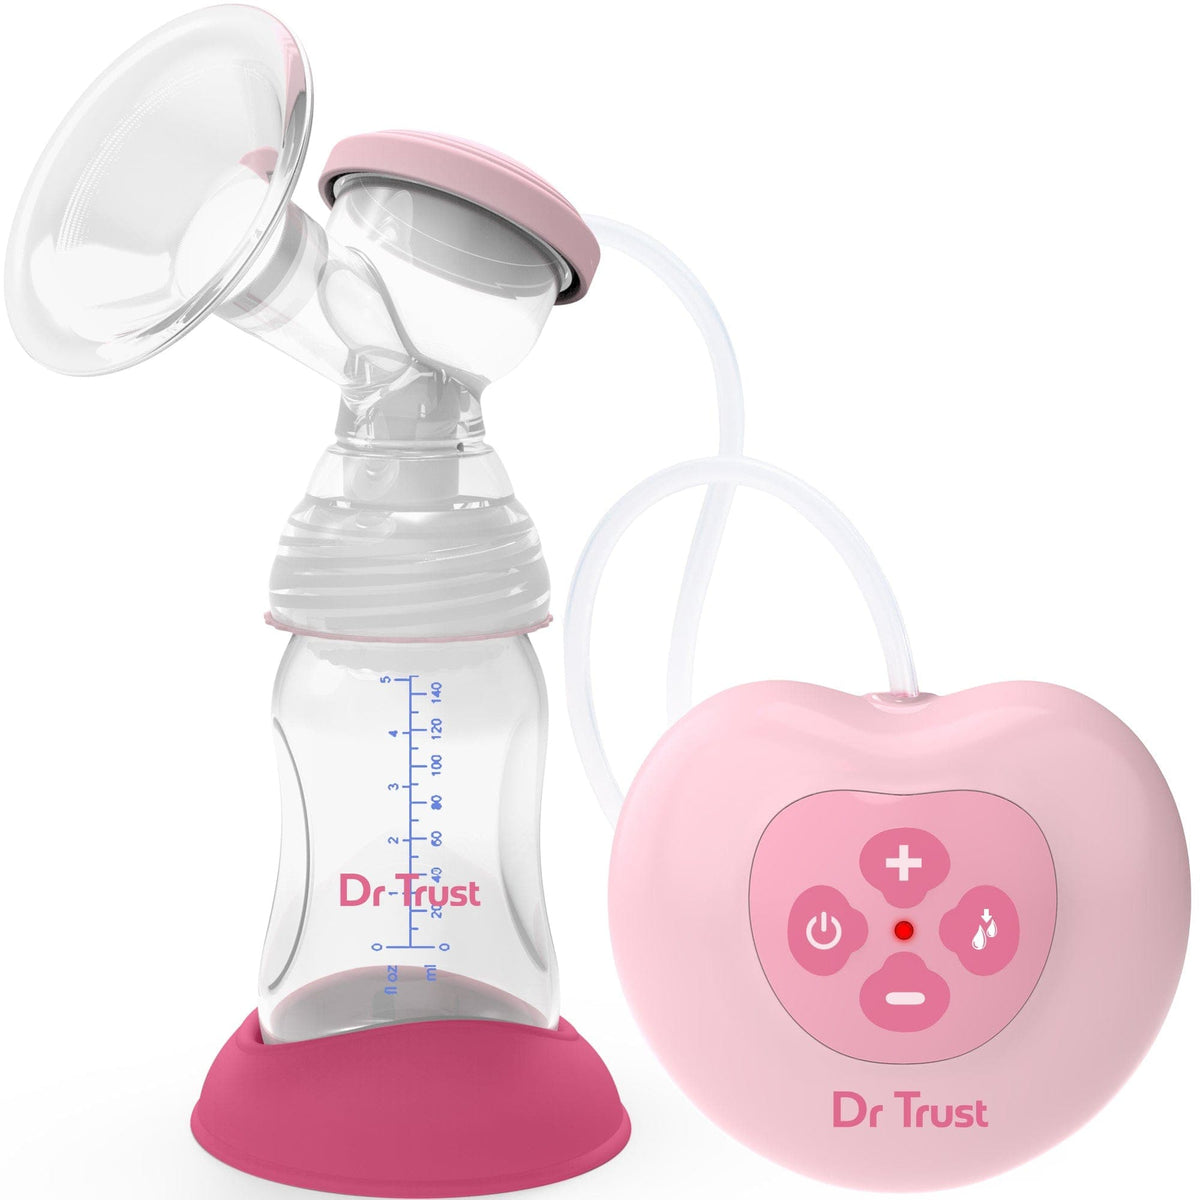 Yd-1131 Portable Electric Breast Pump Hands Free Breast Pump For  Breastfeeding 2 Modes & 9 Suction Levels Low Noise - Electric Breast Pumps  - AliExpress